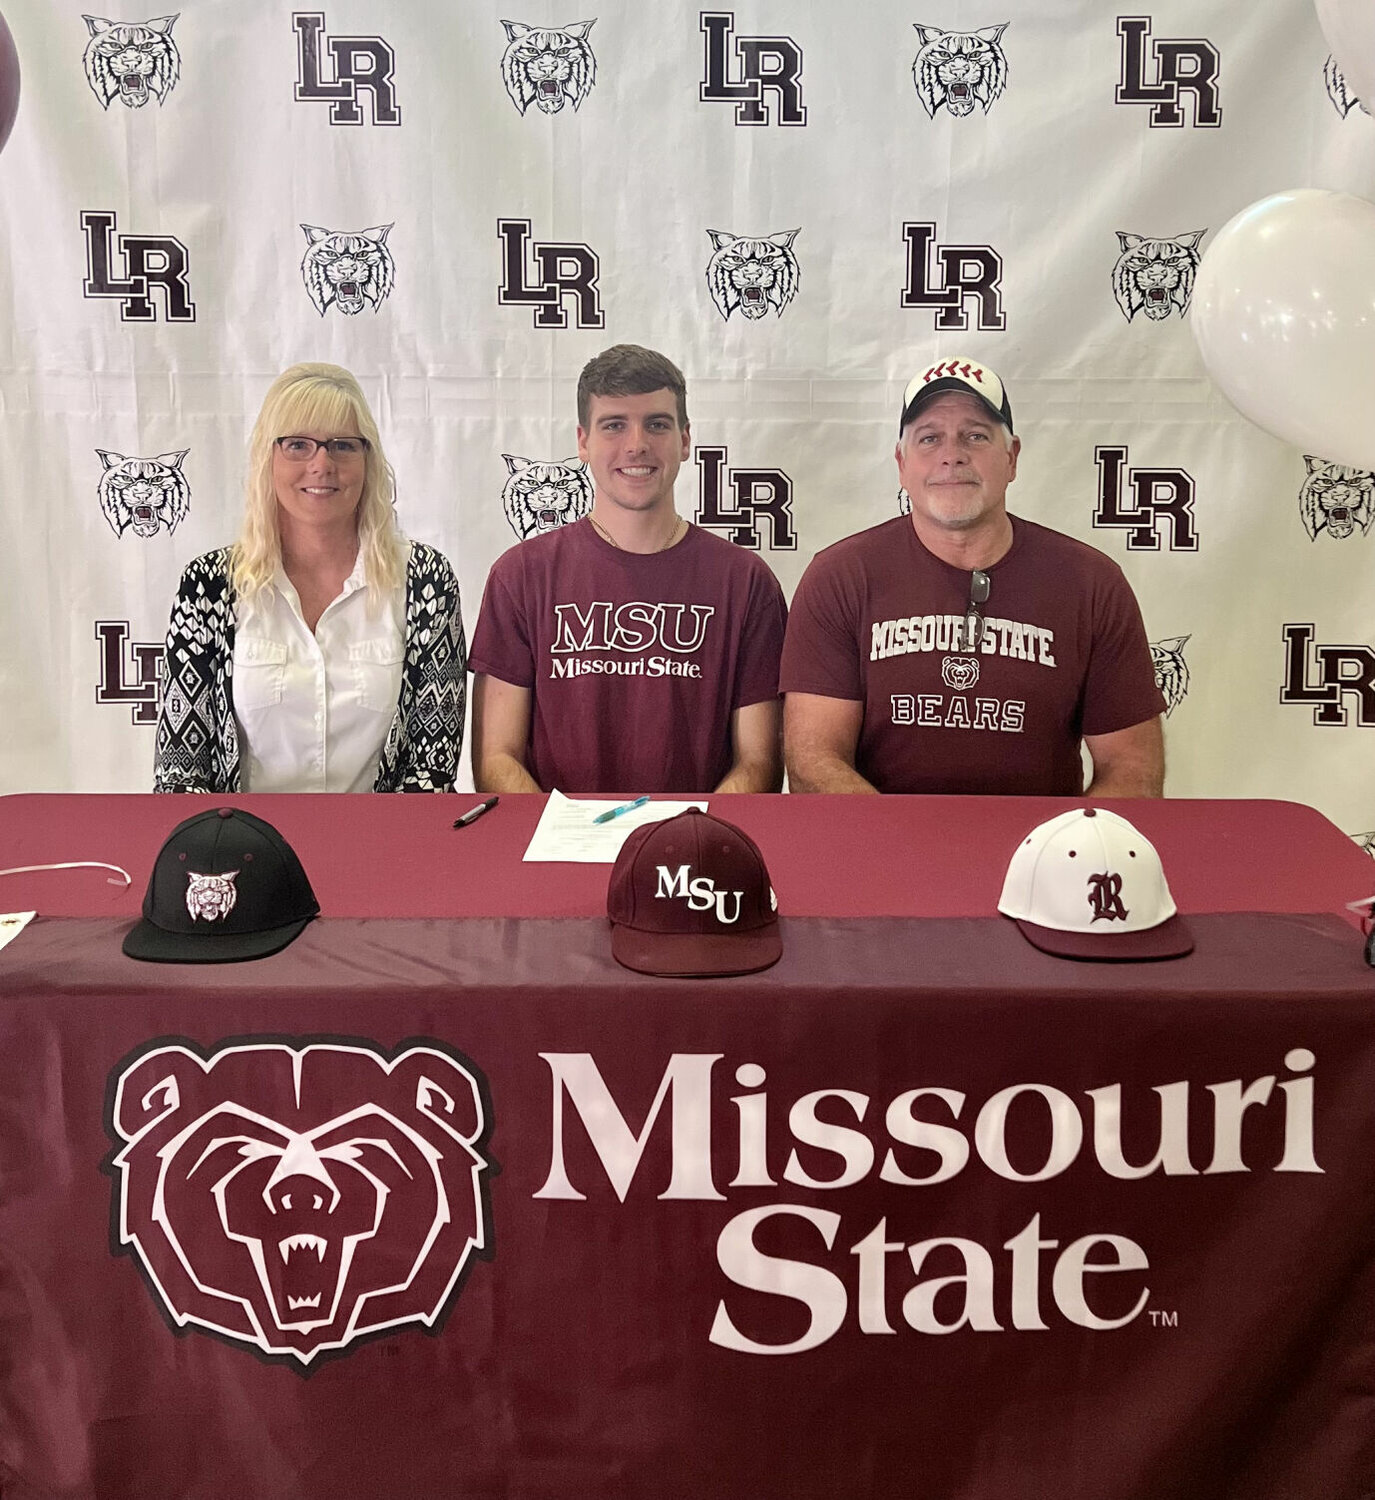 After signing his letter of intent to play Baseball at Missouri State, Brody McNiel is smiling with excitement alongside his family.